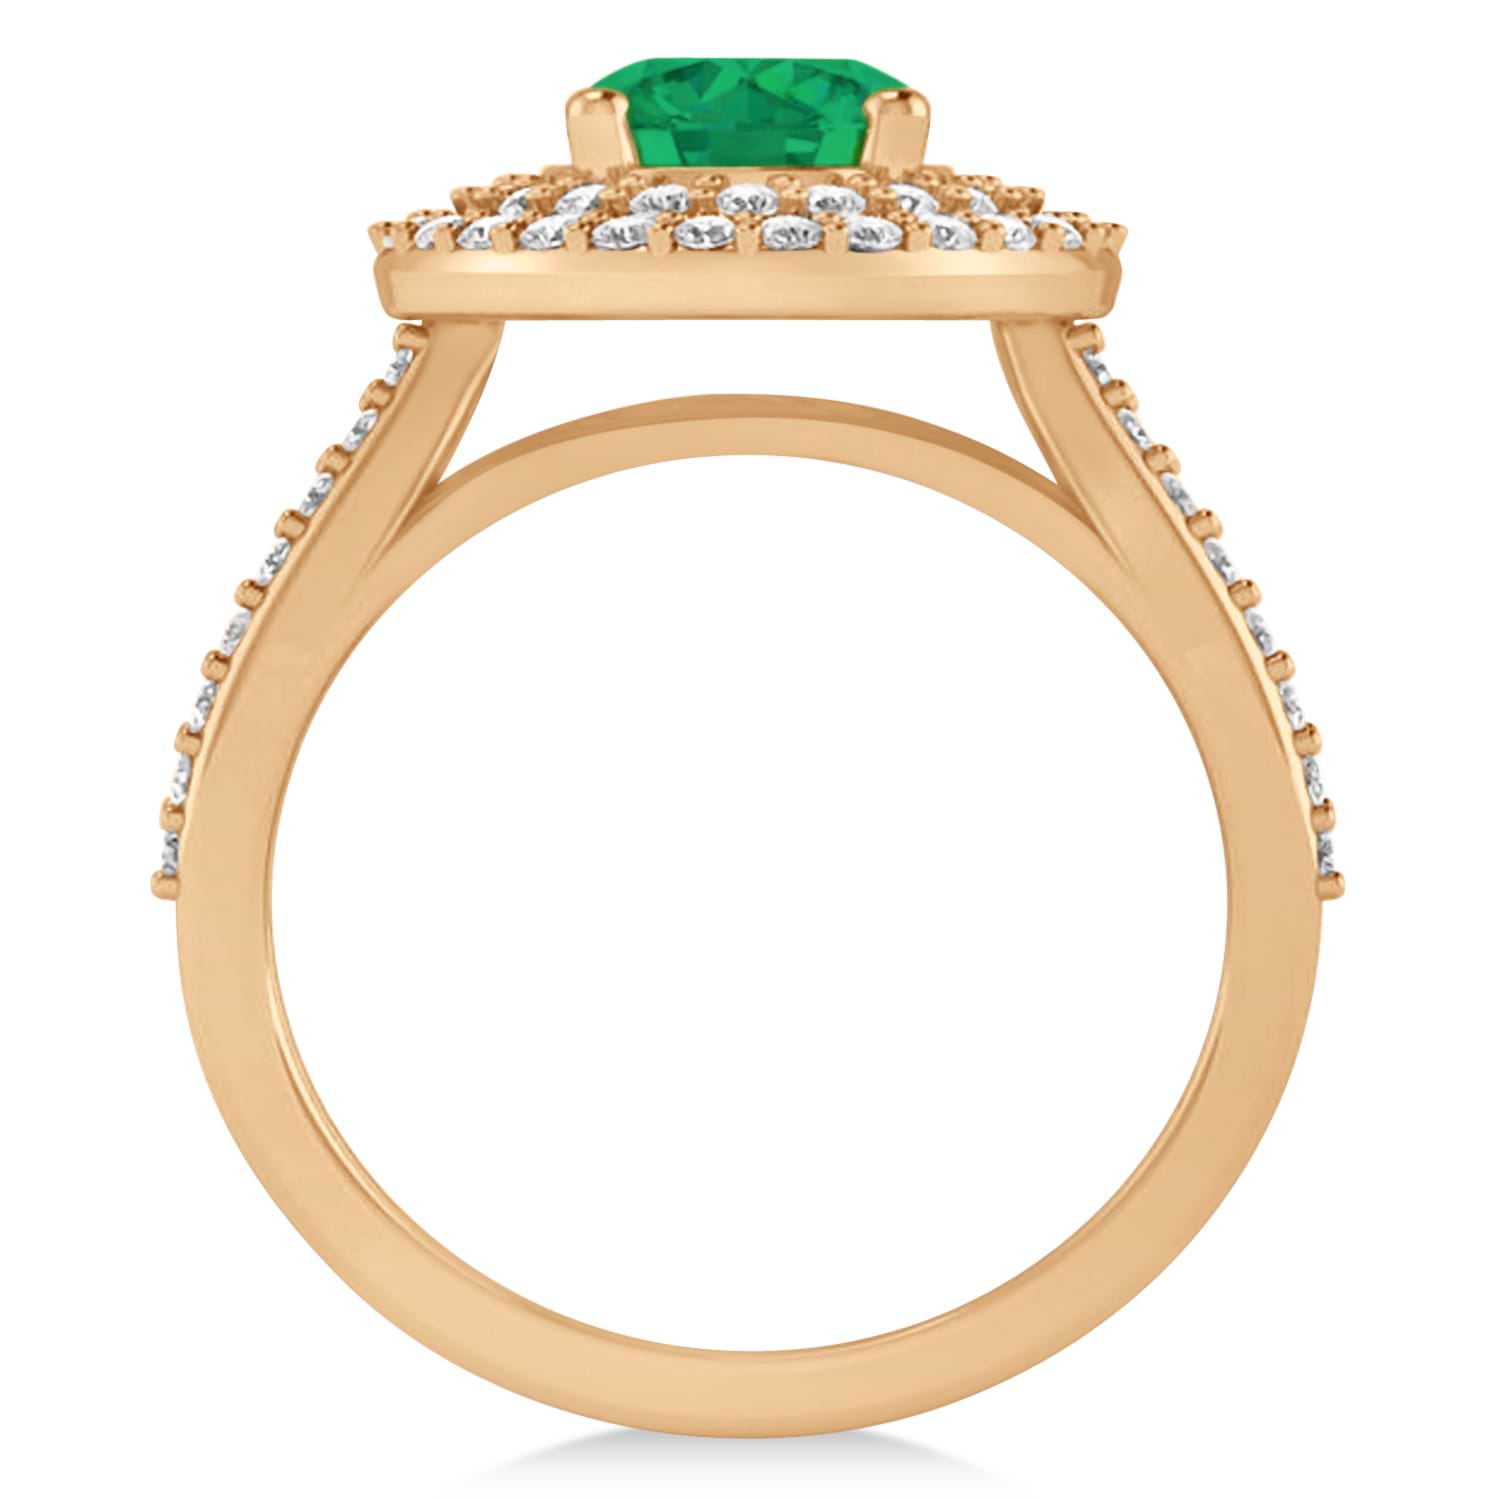 Double Halo Emerald Engagement Ring 14k Rose Gold (2.27ct)